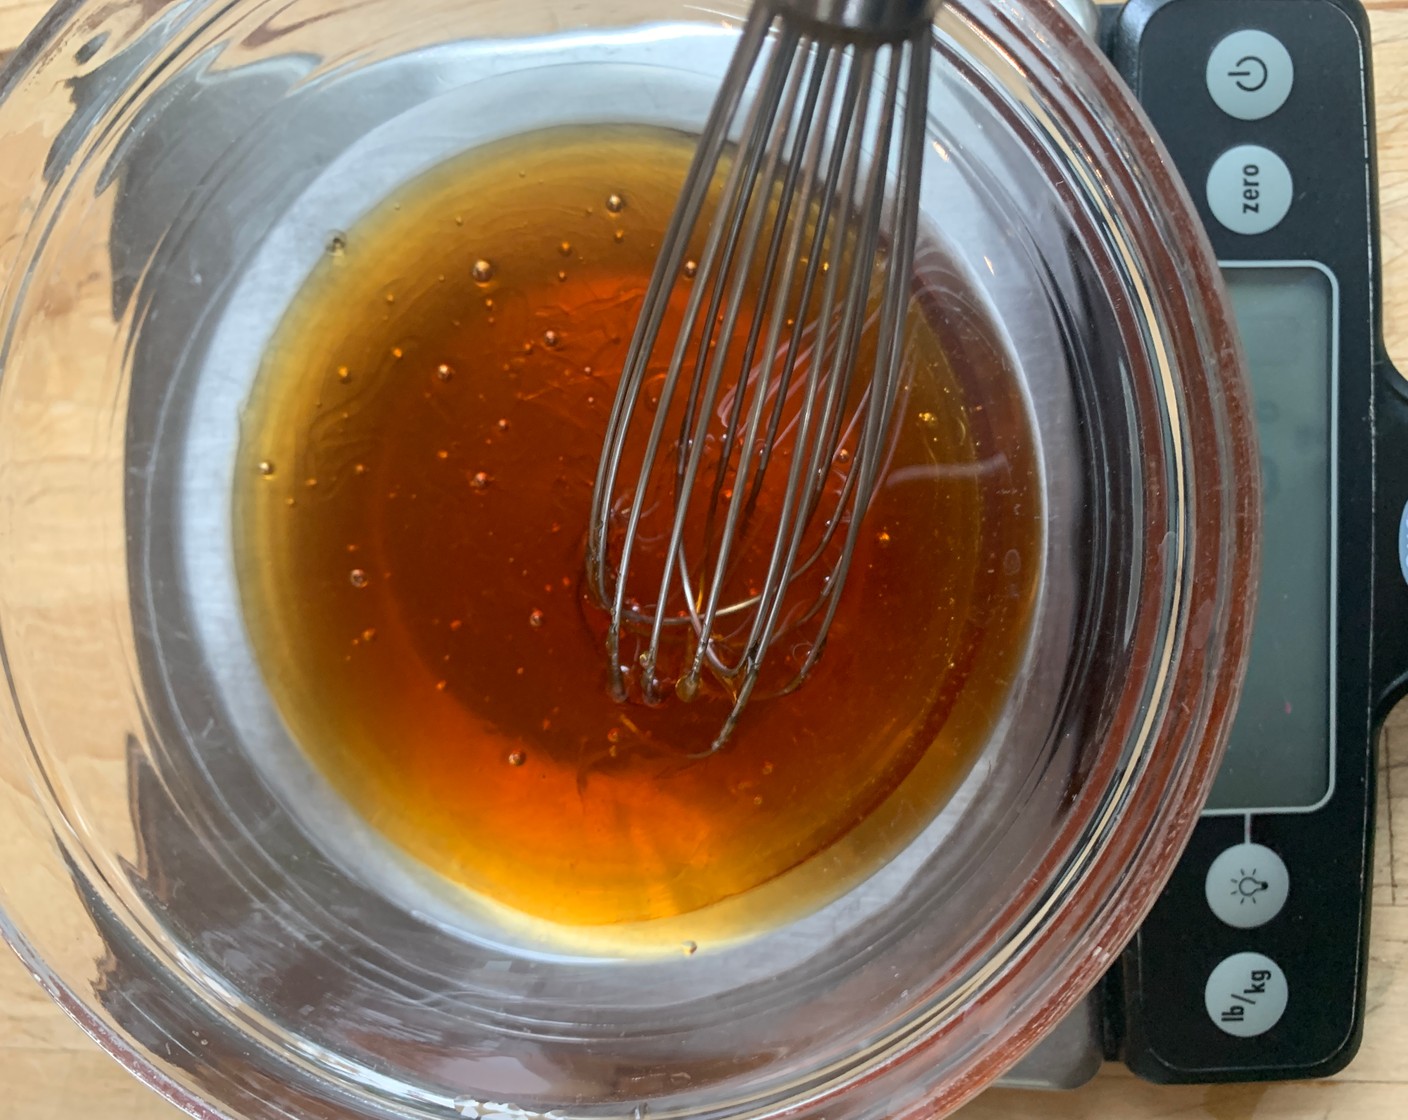 step 1 For the honey syrup, heat the Water (1/2 cup) and Honey (1 1/2 cups) in a small saucepan. Once mixed together remove from heat and set aside to cool. Reserve 1/2 oz for the mocktail and save the rest for another recipe.